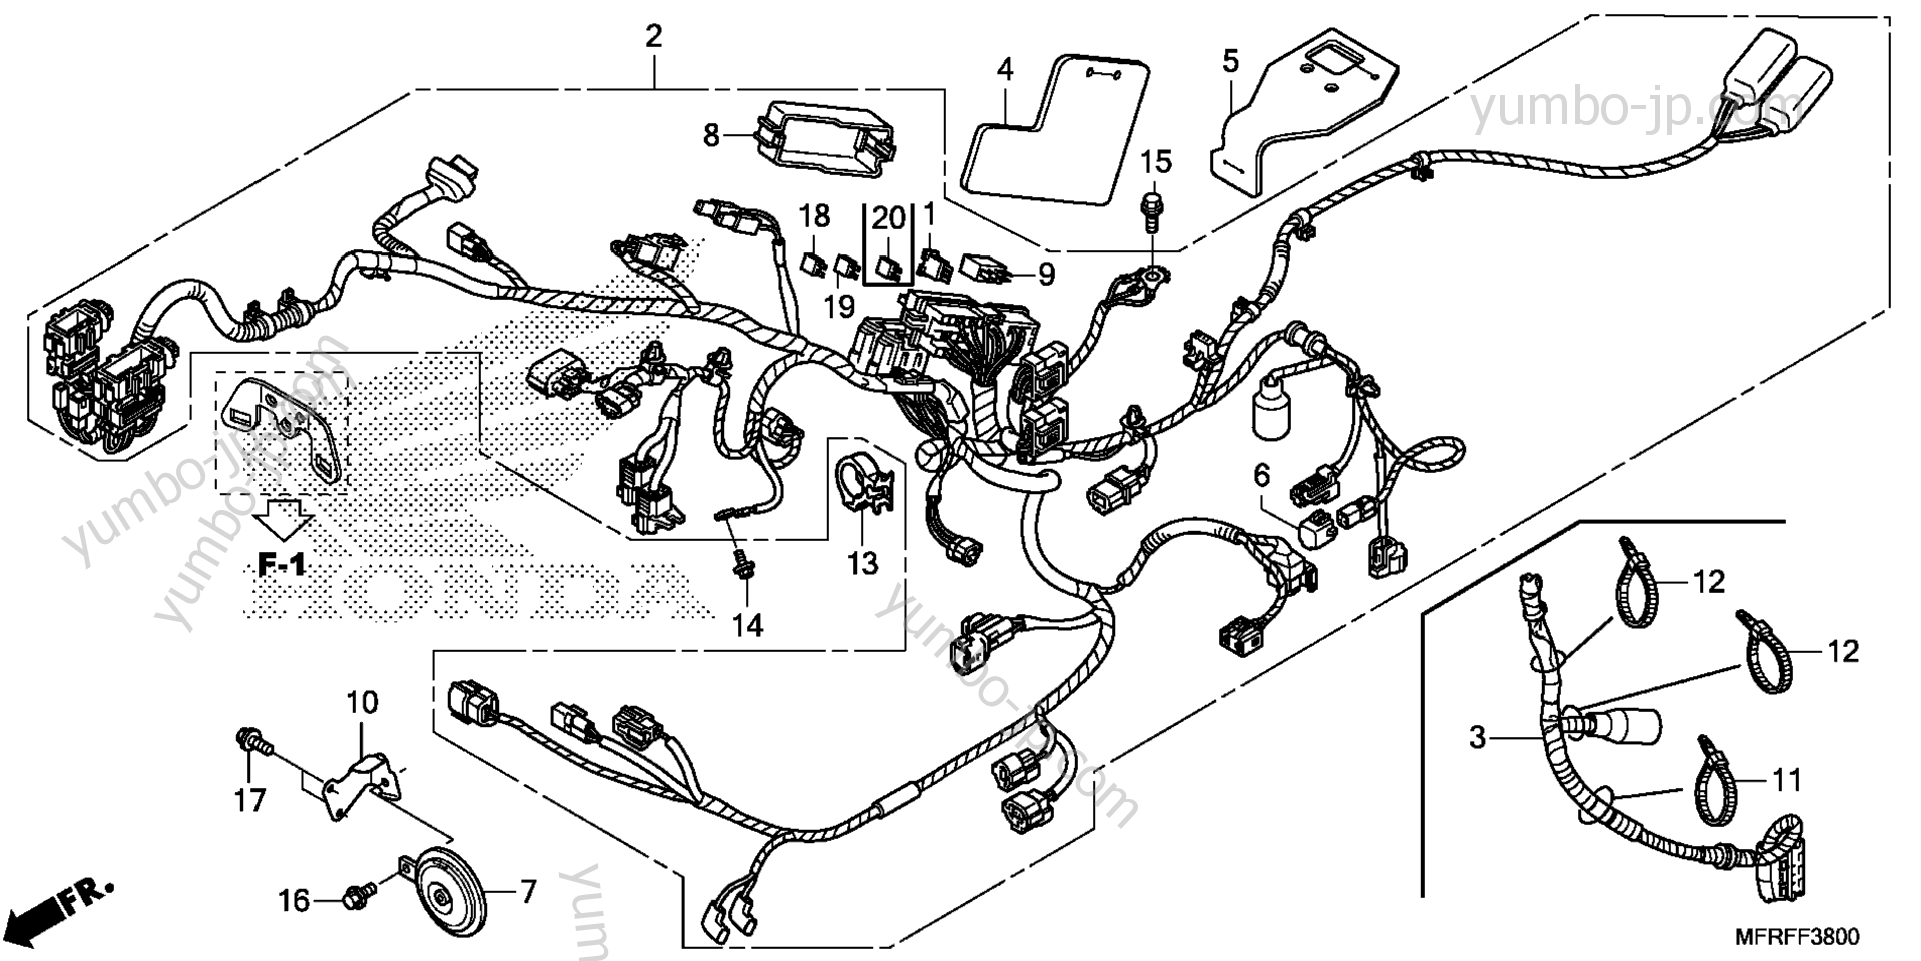 WIRE HARNESS (1) for motorcycles HONDA VT1300CR A 2015 year